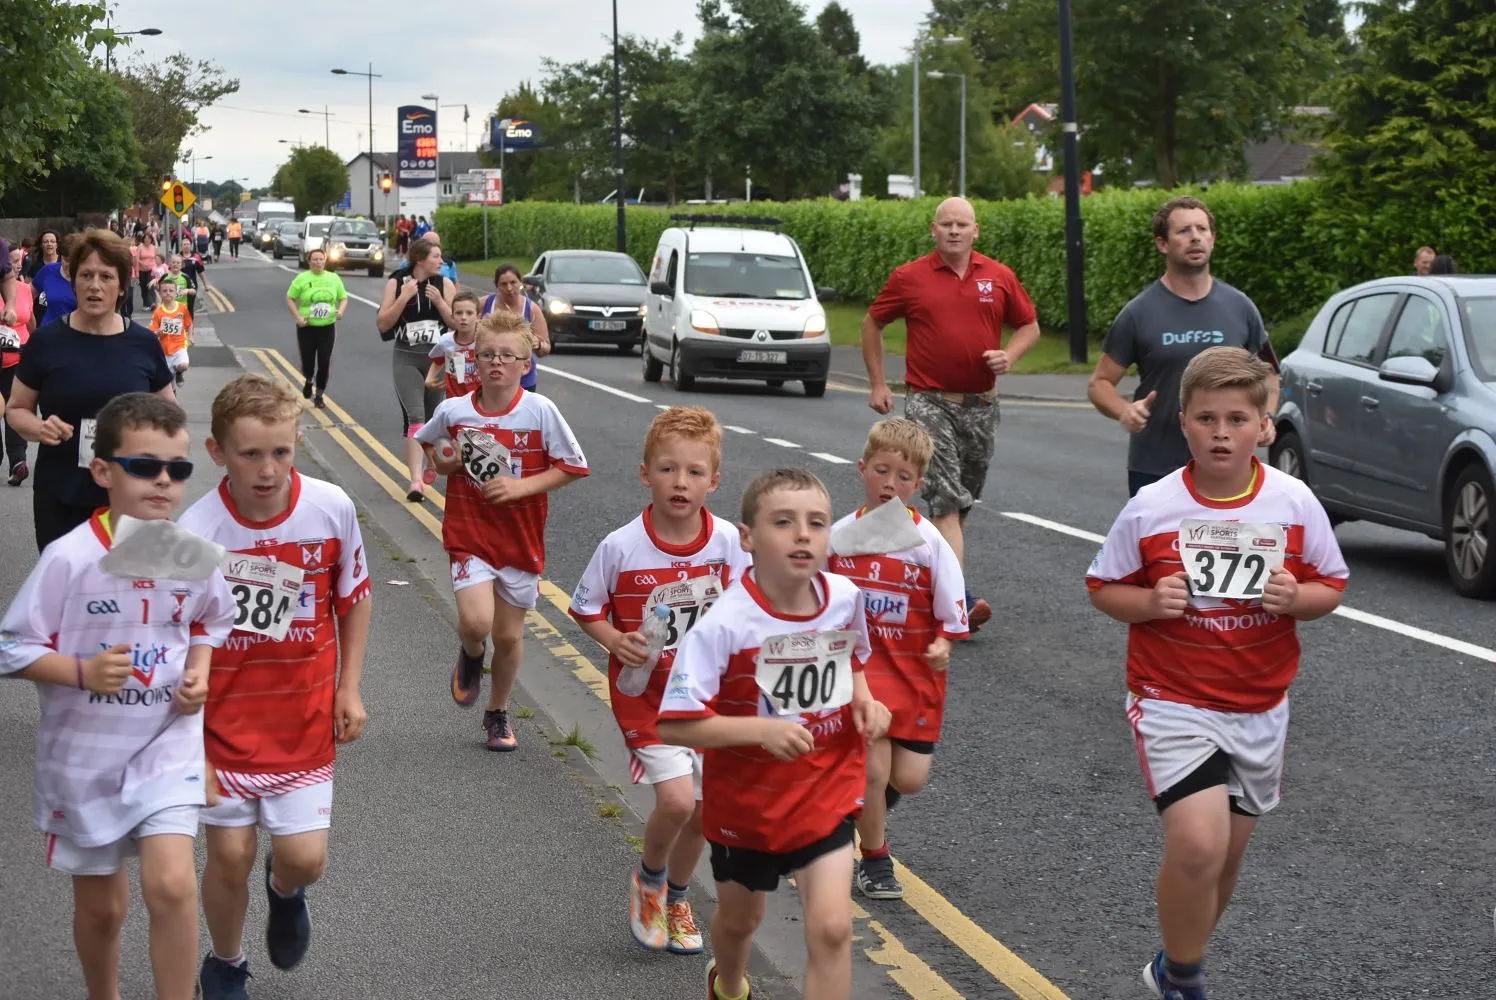 Photo showing: This is a photograph from the 8th annual Kinnegad 5KM Road Race and Fun Run 2017 which was held in the town of Kinnegad, Co. Westmeath, Ireland on Wednesday 5th July 2017 at 20:00. This race has firmly established itself on the local race calendar and yet again the race retains wonderful support from local clubs and runners. The race was first run in 2010 and has used the same route for each of the eight runnings of the race. The race is a right handed course, flat and fast and takes runners on a traffic free route which includes 3KM on the local road 'Boreen Bradach'. The boreen is a flat and sheltered by hedgerow and is a well used local walking and running route.  The boreen benefits from a new surface which was applied over the last two years.  The boreen emerges onto the main street with the finish is on this famous main street of Kinnegad in front of Harry's Hotel. This streetscape will be well known to many many people who traveled between the east and west of Ireland before the arrival of the motorway system which we have today. Kinnegad is situated at the intersection of the both the M6 Galway bound motorway and the M4 Sligo/Mayo bound motorway.
Something about WEATHER

Overall the race was very well organised and there was Garda help with traffic control in the town for the start and finish of the race. The race is organised by Coralstown Kinnegad GAA Club with proceeds from the race going towards the development of the club.

The location of the START (goo.gl/maps/JWpnK) and FINISH (goo.gl/maps/es2Up) of the race are shown on Google Maps. Prize giving, refreshments, parking and registration is at Kinnegad GAA club just off the old Mullingar Road about 500m from the start (goo.gl/Ia9cIR)

Our full set of photographs from tonight's race is available here www.flickr.com/photos/peterm7/albums/72157685768130326

Photographs from Previous Kinnegad 5km Road Races
2016: www.flickr.com/photos/peterm7/albums/72157671016784465
2015: www.flickr.com/photos/peterm7/sets/72157653300652864
2014: www.flickr.com/photos/peterm7/albums/72157645584938282
2013: www.flickr.com/photos/peterm7/sets/72157634580196967/
2012: www.flickr.com/photos/peterm7/sets/72157630534171096/
2011: www.flickr.com/photos/peterm7/sets/72157627186893850/
2010: www.flickr.com/photos/peterm7/sets/72157624580703513

Can I use these photographs directly from Flickr on my social media account(s)?
Yes - of course you can! Flickr provides several ways to share this and other photographs in this Flickr set. You can share directly to: email, Facebook, Instagram, Pinterest, Twitter, Tumblr, LiveJournal, and Wordpress and Blogger blog sites. Your mobile, tablet, or desktop device will also offer you several different options for sharing this photo page on your social media outlets.
BUT..... Wait there a minute....
We take these photographs as a hobby and as a contribution to the running community in Ireland. We do not charge for our photographs. Our only "cost" is that we request that if you are using these images: (1) on social media sites such as Facebook, Tumblr, Pinterest, Twitter,LinkedIn, Google+, VK.com, Vine, Meetup, Tagged, Ask.fm,etc or (2) other websites, blogs, web multimedia, commercial/promotional material that you must provide a link back to our Flickr page to attribute us or acknowledge us as the original photographers.
This also extends to the use of these images for Facebook profile pictures. In these cases please make a separate wall or blog post with a link to our Flickr page. If you do not know how this should be done for Facebook or other social media please email us and we will be happy to help suggest how to link to us.
I want to download these pictures to my computer or device?
You can download this photographic image here directly to your computer or device. This version is the low resolution web-quality image. How to download will vary slight from device to device and from browser to browser. Have a look for a down-arrow symbol or the link to 'View/Download' all sizes. When you click on either of these you will be presented with the option to download the image. Remember just doing a right-click and "save target as" will not work on Flickr.
I want get full resolution, print-quality, copies of these photographs?
If you just need these photographs for online usage then they can be used directly once you respect their Creative Commons license and provide a link back to our Flickr set if you use them. For offline usage and printing all of the photographs posted here on this Flickr set are available free, at no cost, at full image resolution.
Please email petermooney78 AT gmail DOT com with the links to the photographs you would like to obtain a full resolution copy of. We also ask race organisers, media, etc to ask for permission before use of our images for flyers, posters, etc. We reserve the right to refuse a request.
In summary please remember when requesting photographs from us - If you are using the photographs online all we ask is for you to provide a link back to our Flickr set or Flickr pages. You will find the link above clearly outlined in the description text which accompanies this photograph. Taking these photographs and preparing them for online posting takes a significant effort and time. We are not posting photographs to Flickr for commercial reasons. If you really like what we do please spread the link around your social media, send us an email, leave a comment beside the photographs, send us a Flickr email, etc. If you are using the photographs in newspapers or magazines we ask that you mention where the original photograph came from.
I would like to contribute something for your photograph(s)?
Many people offer payment for our photographs. As stated above we do not charge for these photographs. We take these photographs as our contribution to the running community in Ireland. If you feel that the photograph(s) you request are good enough that you would consider paying for their purchase from other photographic providers or in other circumstances we would suggest that you can provide a donation to any of the great charities in Ireland who do work for Cancer Care or Cancer Research in Ireland.
Let's get a bit technical: We use Creative Commons Licensing for these photographs
We use the Creative Commons Attribution-ShareAlike License for all our photographs here in this photograph set. What does this mean in reality?
The explaination is very simple.
Attribution- anyone using our photographs gives us an appropriate credit for it. This ensures that people aren't taking our photographs and passing them off as their own. This usually just mean putting a link to our photographs somewhere on your website, blog, or Facebook where other people can see it.
ShareAlike – anyone can use these photographs, and make changes if they like, or incorporate them into a bigger project, but they must make those changes available back to the community under the same terms.
Above all what Creative Commons aims to do is to encourage creative sharing. See some examples of Creative Commons photographs on Flickr: www.flickr.com/creativecommons/
I ran in the race - but my photograph doesn't appear here in your Flickr set! What gives?
As mentioned above we take these photographs as a hobby and as a voluntary contribution to the running community in Ireland. Very often we have actually ran in the same race and then switched to photographer mode after we finished the race. Consequently, we feel that we have no obligations to capture a photograph of every participant in the race. However, we do try our very best to capture as many participants as possible. But this is sometimes not possible for a variety of reasons:
►You were hidden behind another participant as you passed our camera
►Weather or lighting conditions meant that we had some photographs with blurry content which we did not upload to our Flickr set
►There were too many people - some races attract thousands of participants and as amateur photographs we cannot hope to capture photographs of everyone
►We simply missed you - sorry about that - we did our best!

You can email us petermooney78 AT gmail DOT com to enquire if we have a photograph of you which didn't make the final Flickr selection for the race. But we cannot promise that there will be photograph there. As alternatives we advise you to contact the race organisers to enquire if there were (1) other photographs taking photographs at the race event or if (2) there were professional commercial sports photographers taking photographs which might have some photographs of you available for purchase. You might find some links for further information above.
Don't like your photograph here?
That's OK! We understand!
If, for any reason, you are not happy or comfortable with your picture appearing here in this photoset on Flickr then please email us at petermooney78 AT gmail DOT com and we will remove it as soon as possible. We give careful consideration to each photograph before uploading.
I want to tell people about these great photographs!

Great! Thank you! The best link to spread the word around is probably http://www.flickr.com/peterm7/sets